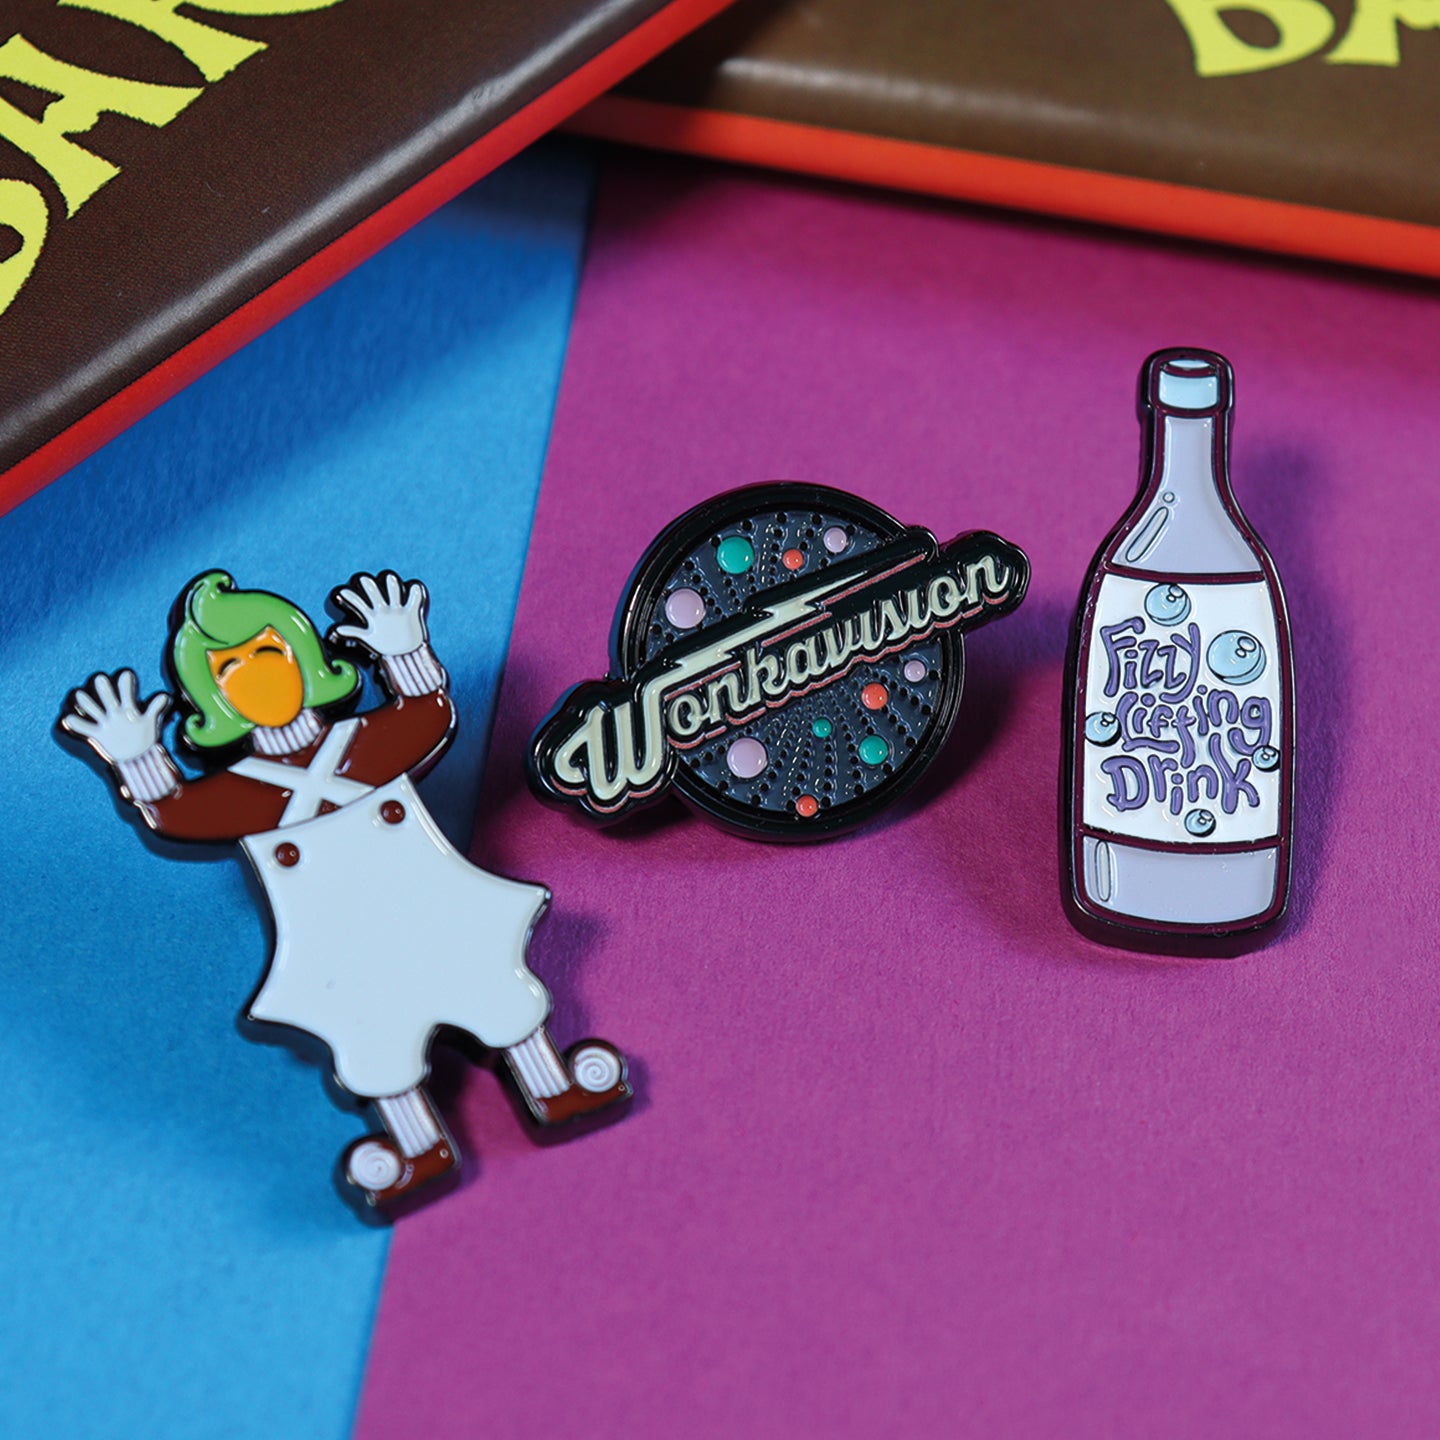 Willy Wonka and the Chocolate Factory Limited Edition Triple Pin Badge Set